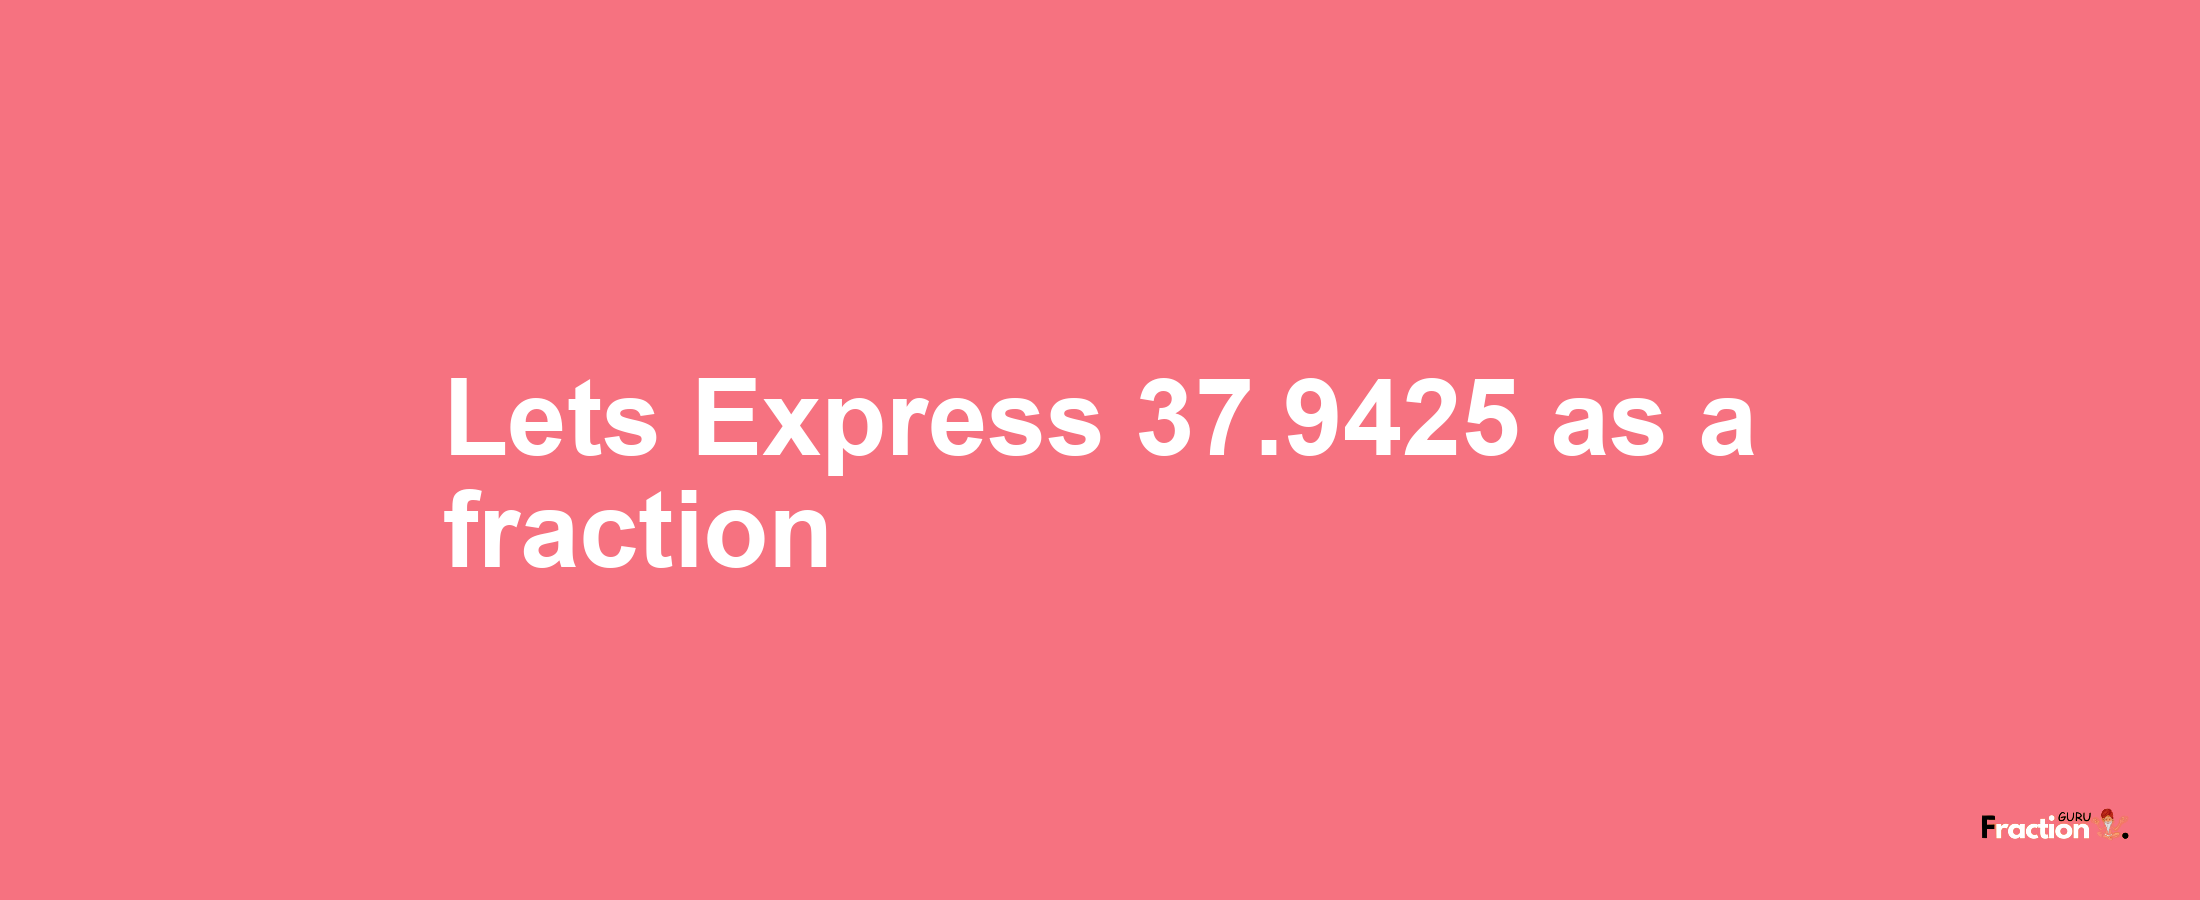 Lets Express 37.9425 as afraction